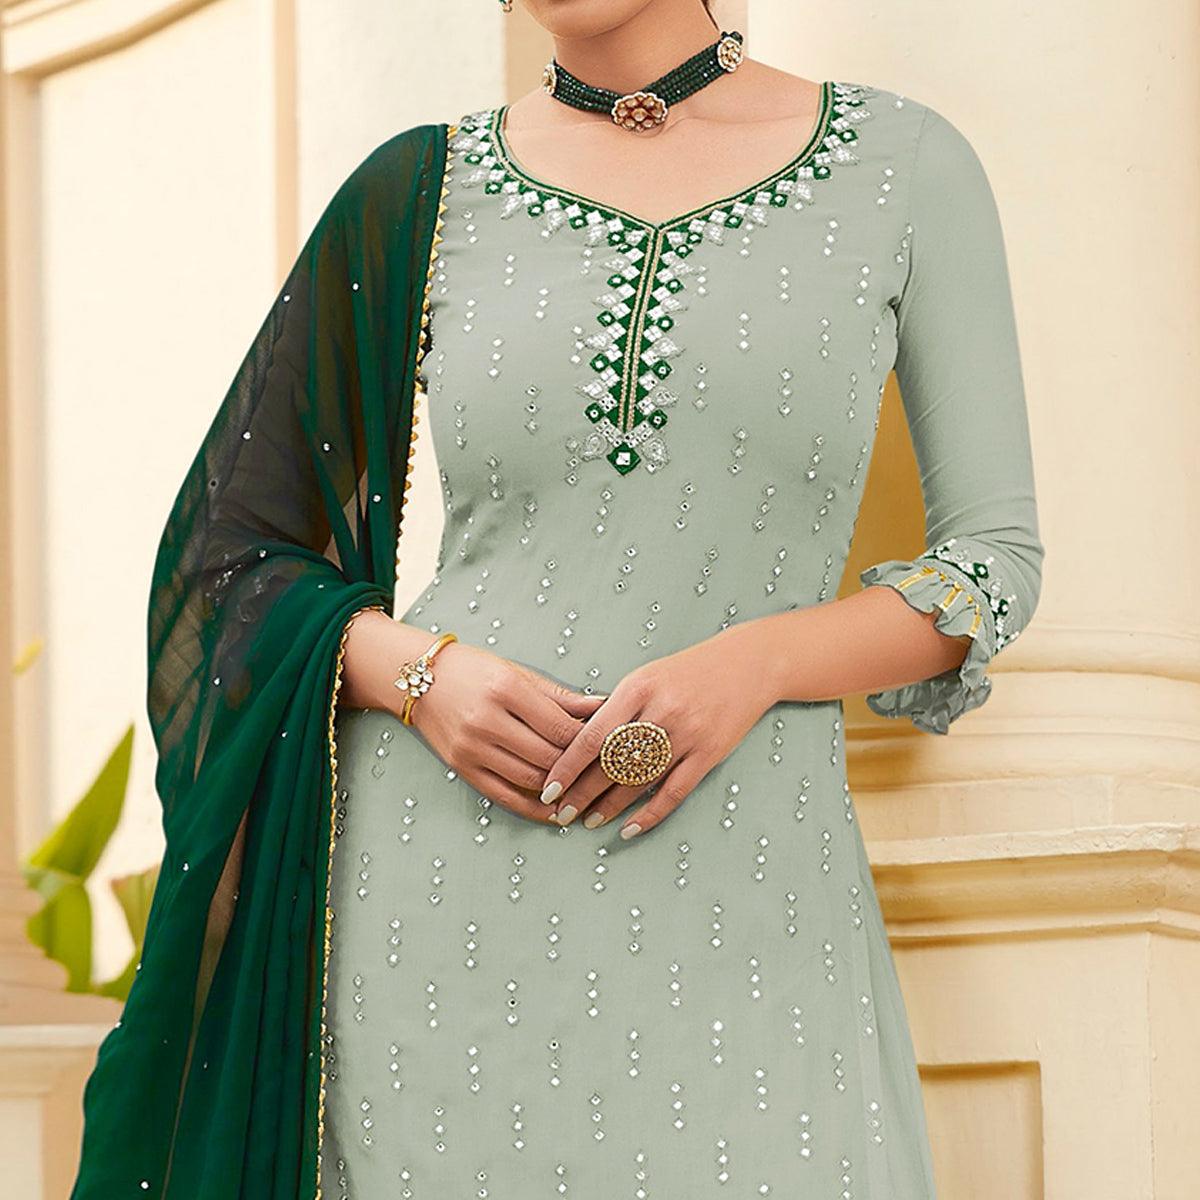 Flattering Pastel Green Colored Partywear Embroidered Georgette Palazzo Suit - Peachmode